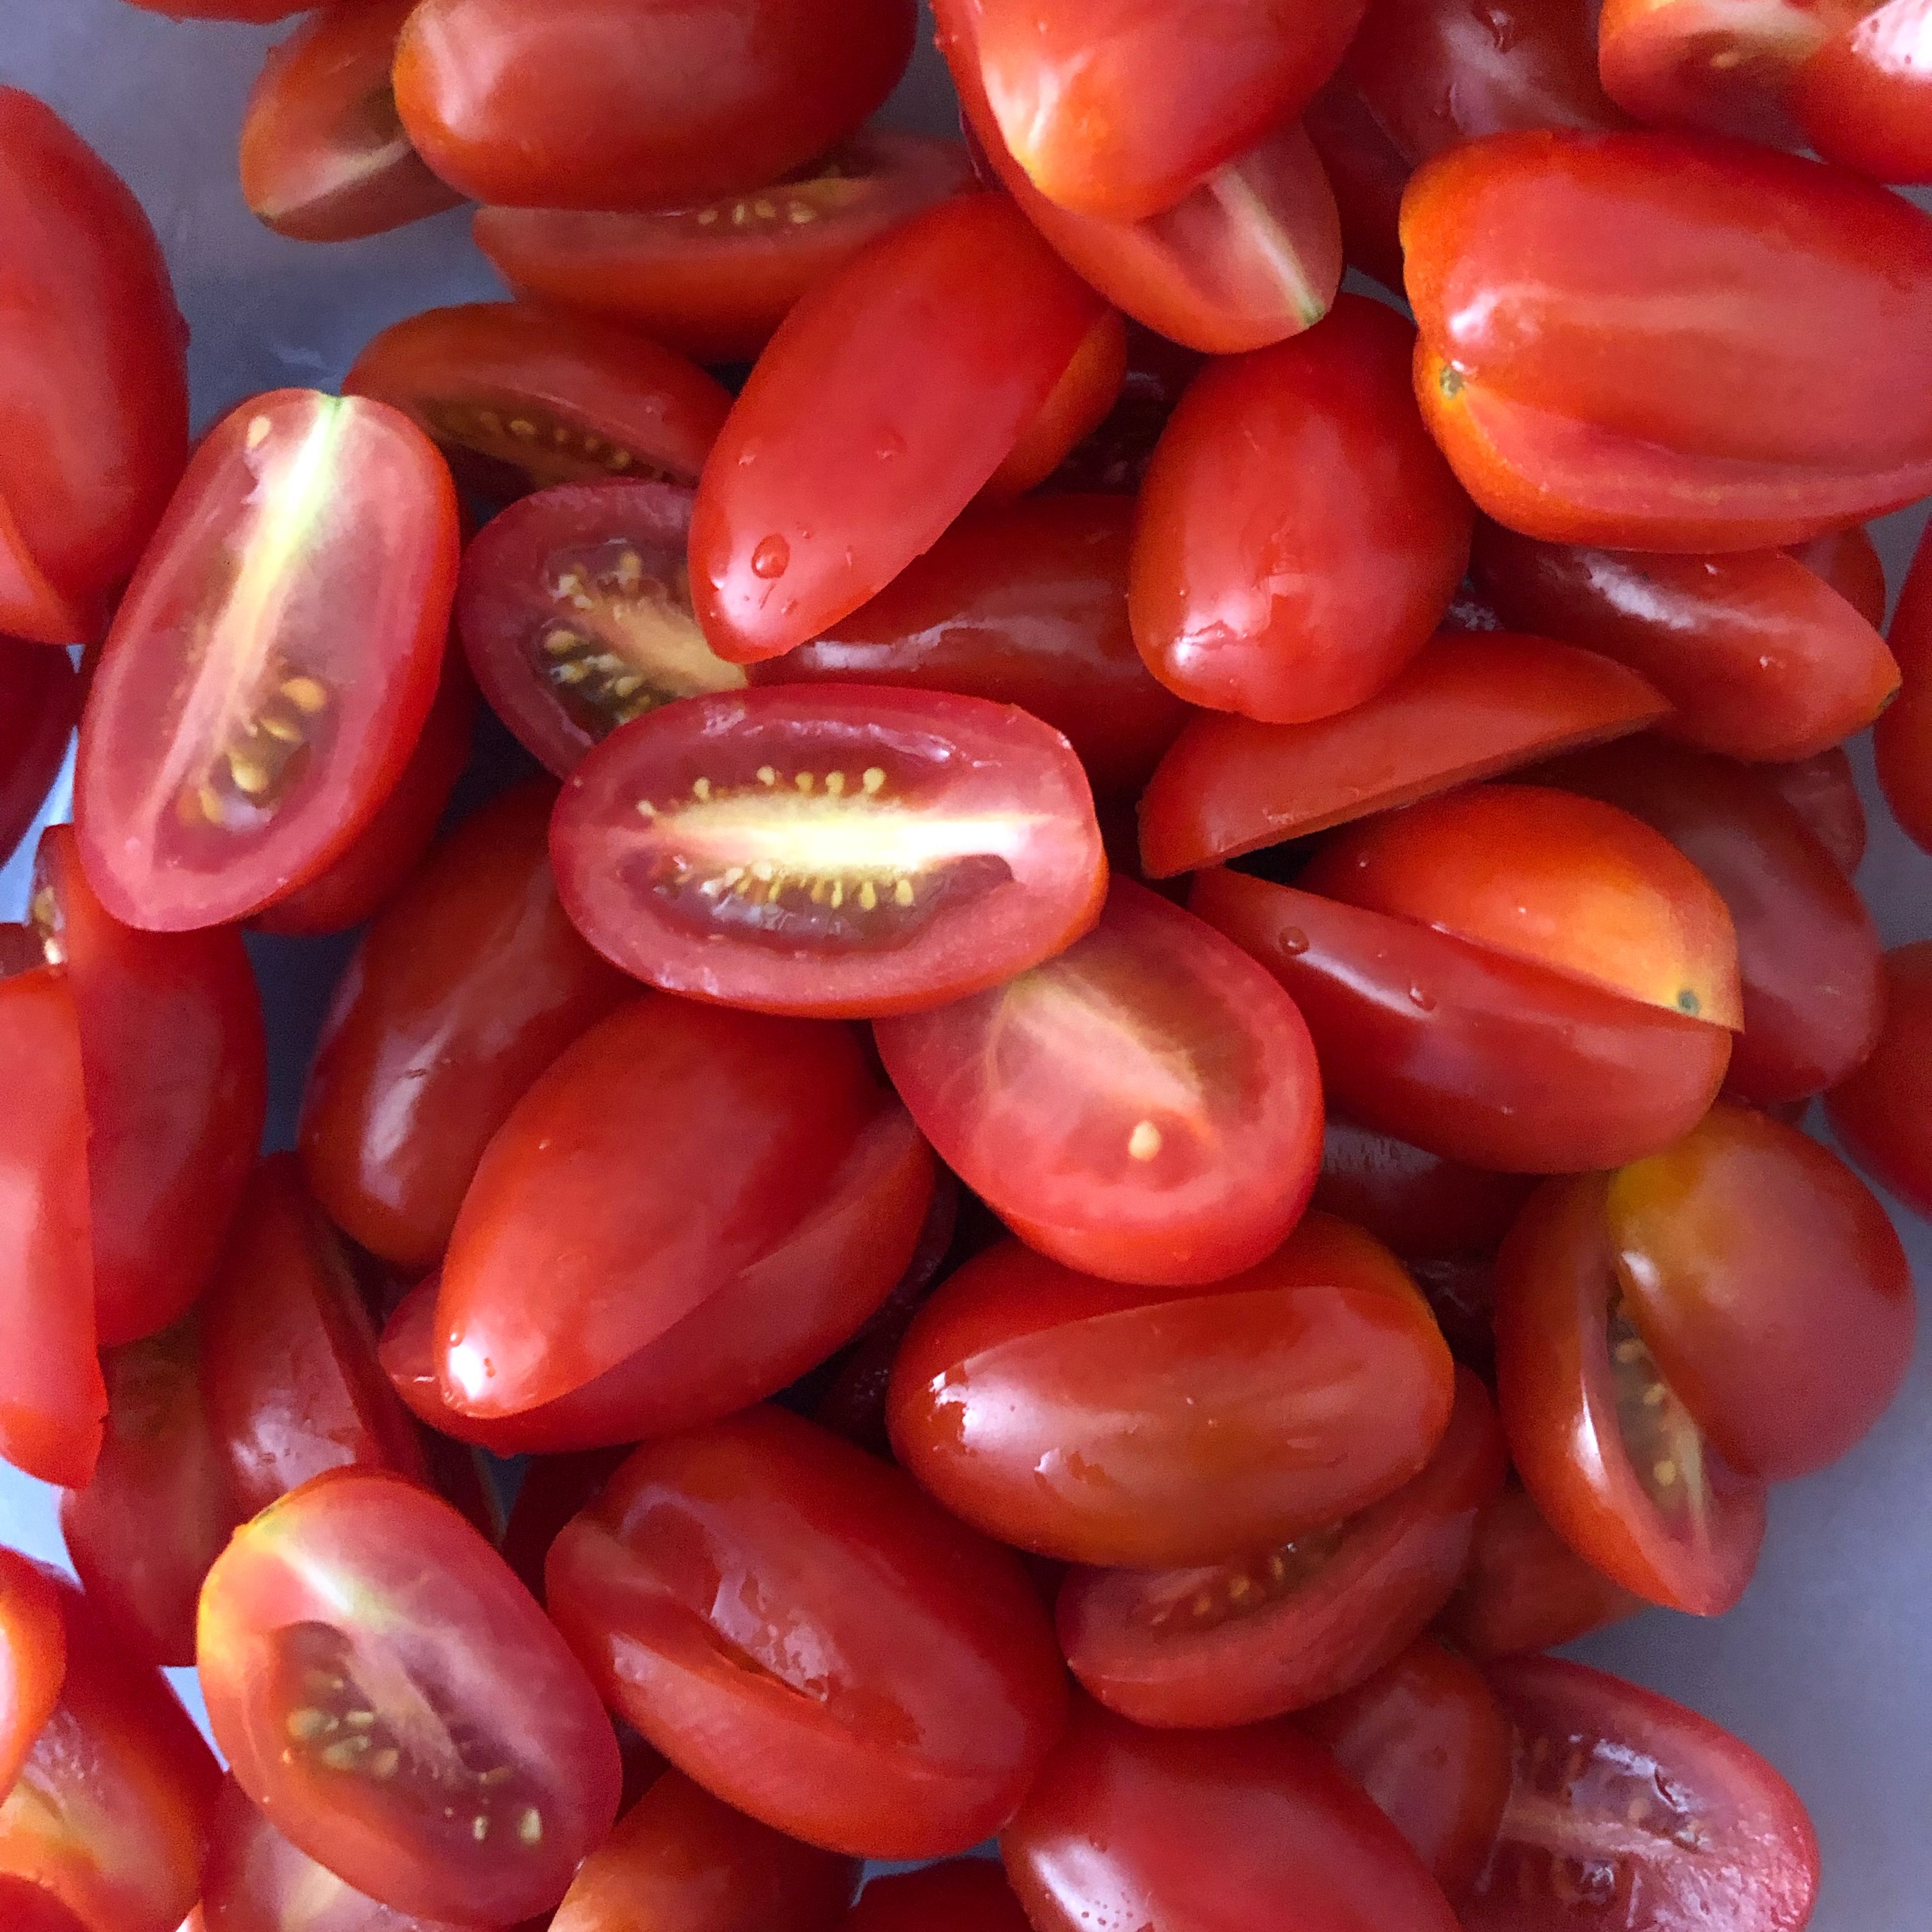 Wash and cut cherry tomatoes into halves or quarters.